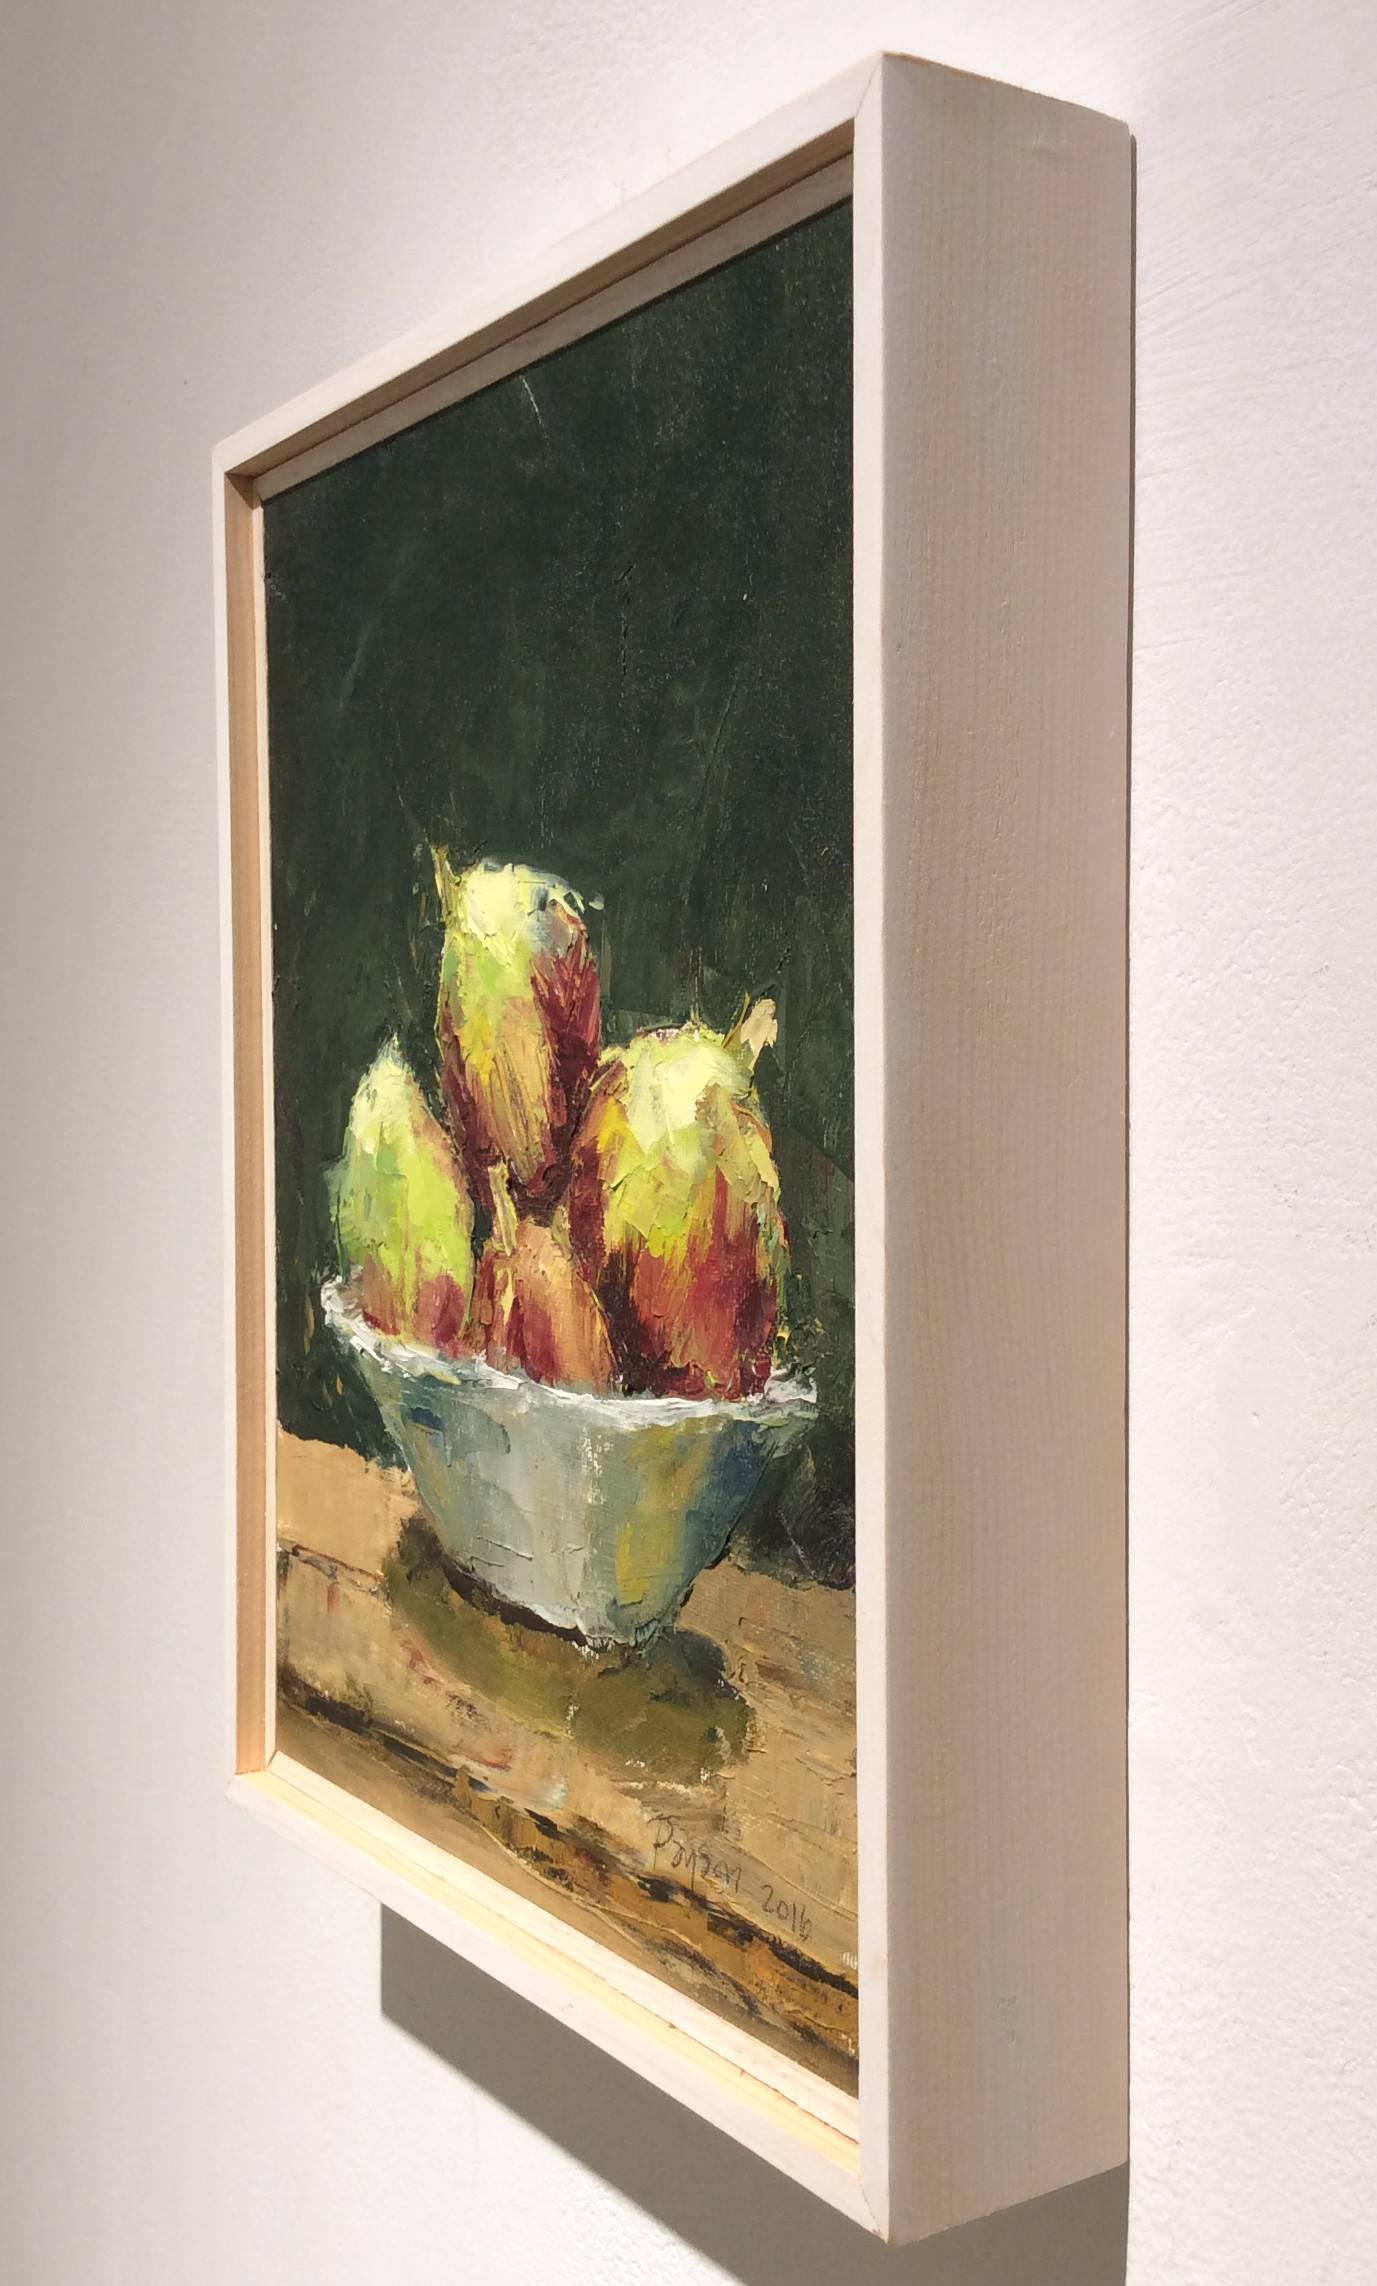 oil on canvas mounted on panel in thin, light wood frame
11.5 x 9.5 x 1.75

This luscious fruit still life painting was made by Hudson Valley based artist, Dale Payson, in 2016. Here the artist puts a modern, intriguing twist on a tradition subject